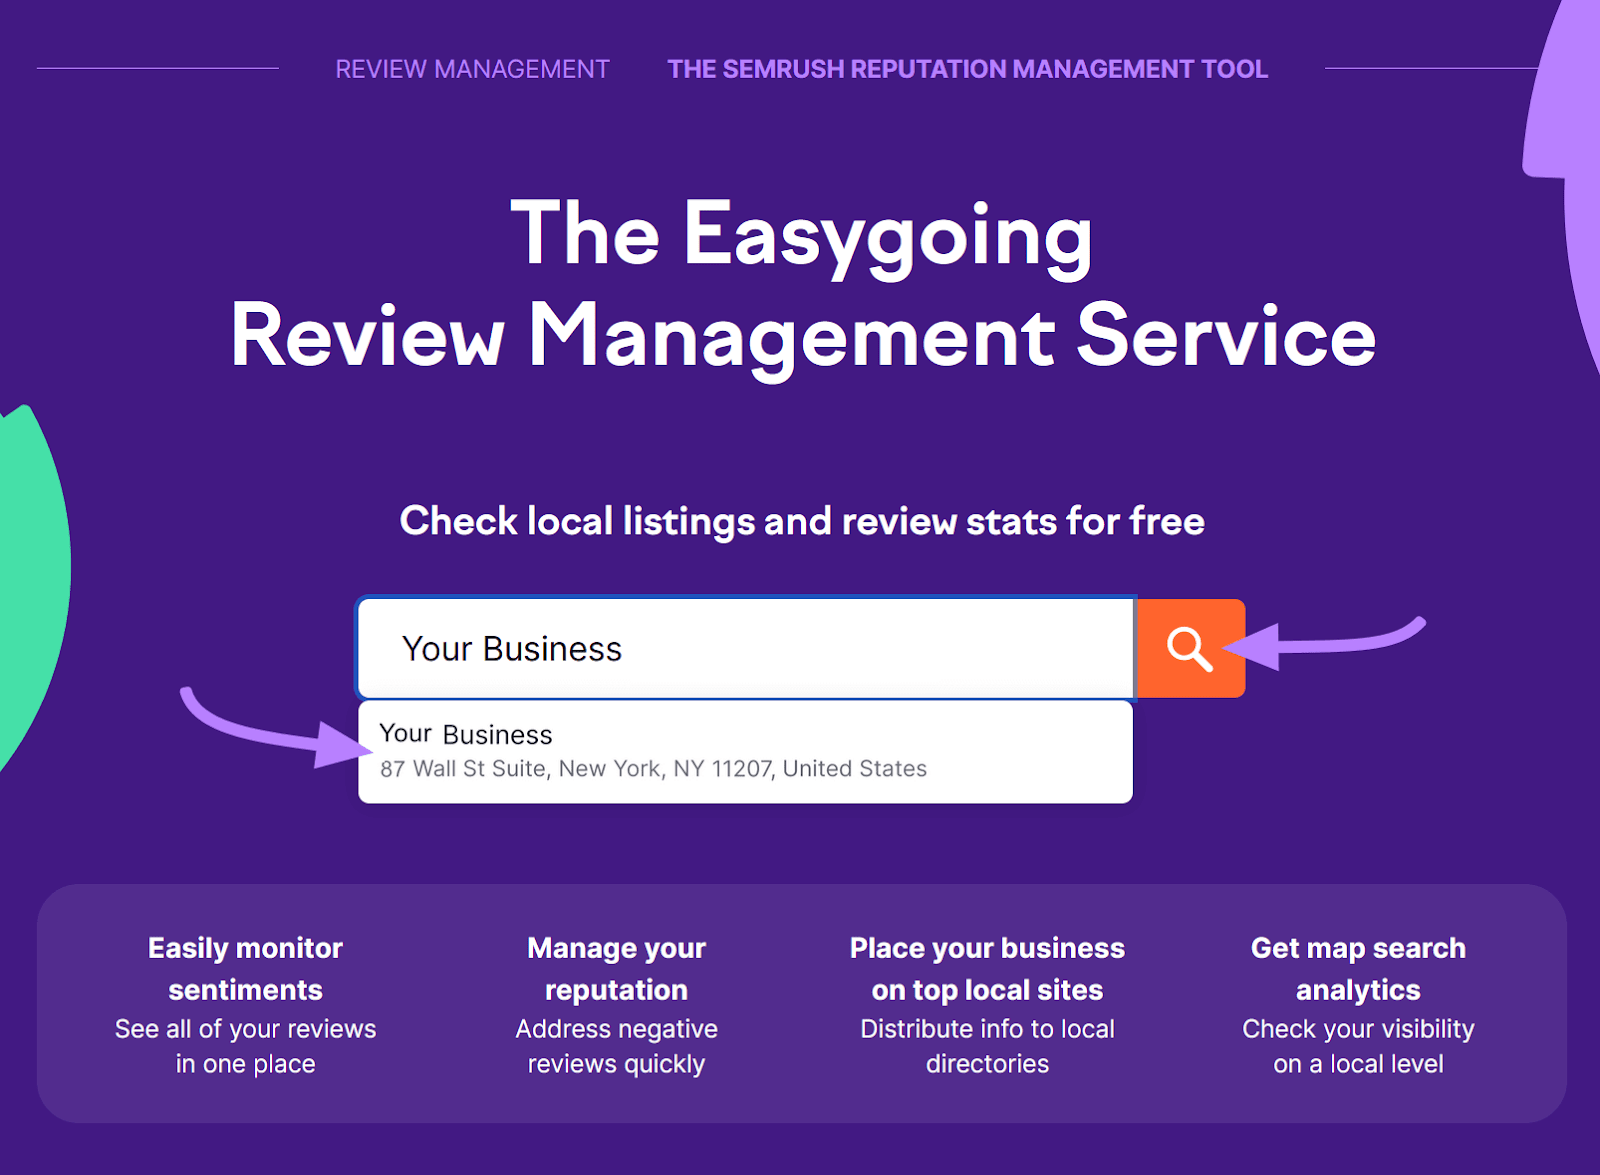 Review Management tool